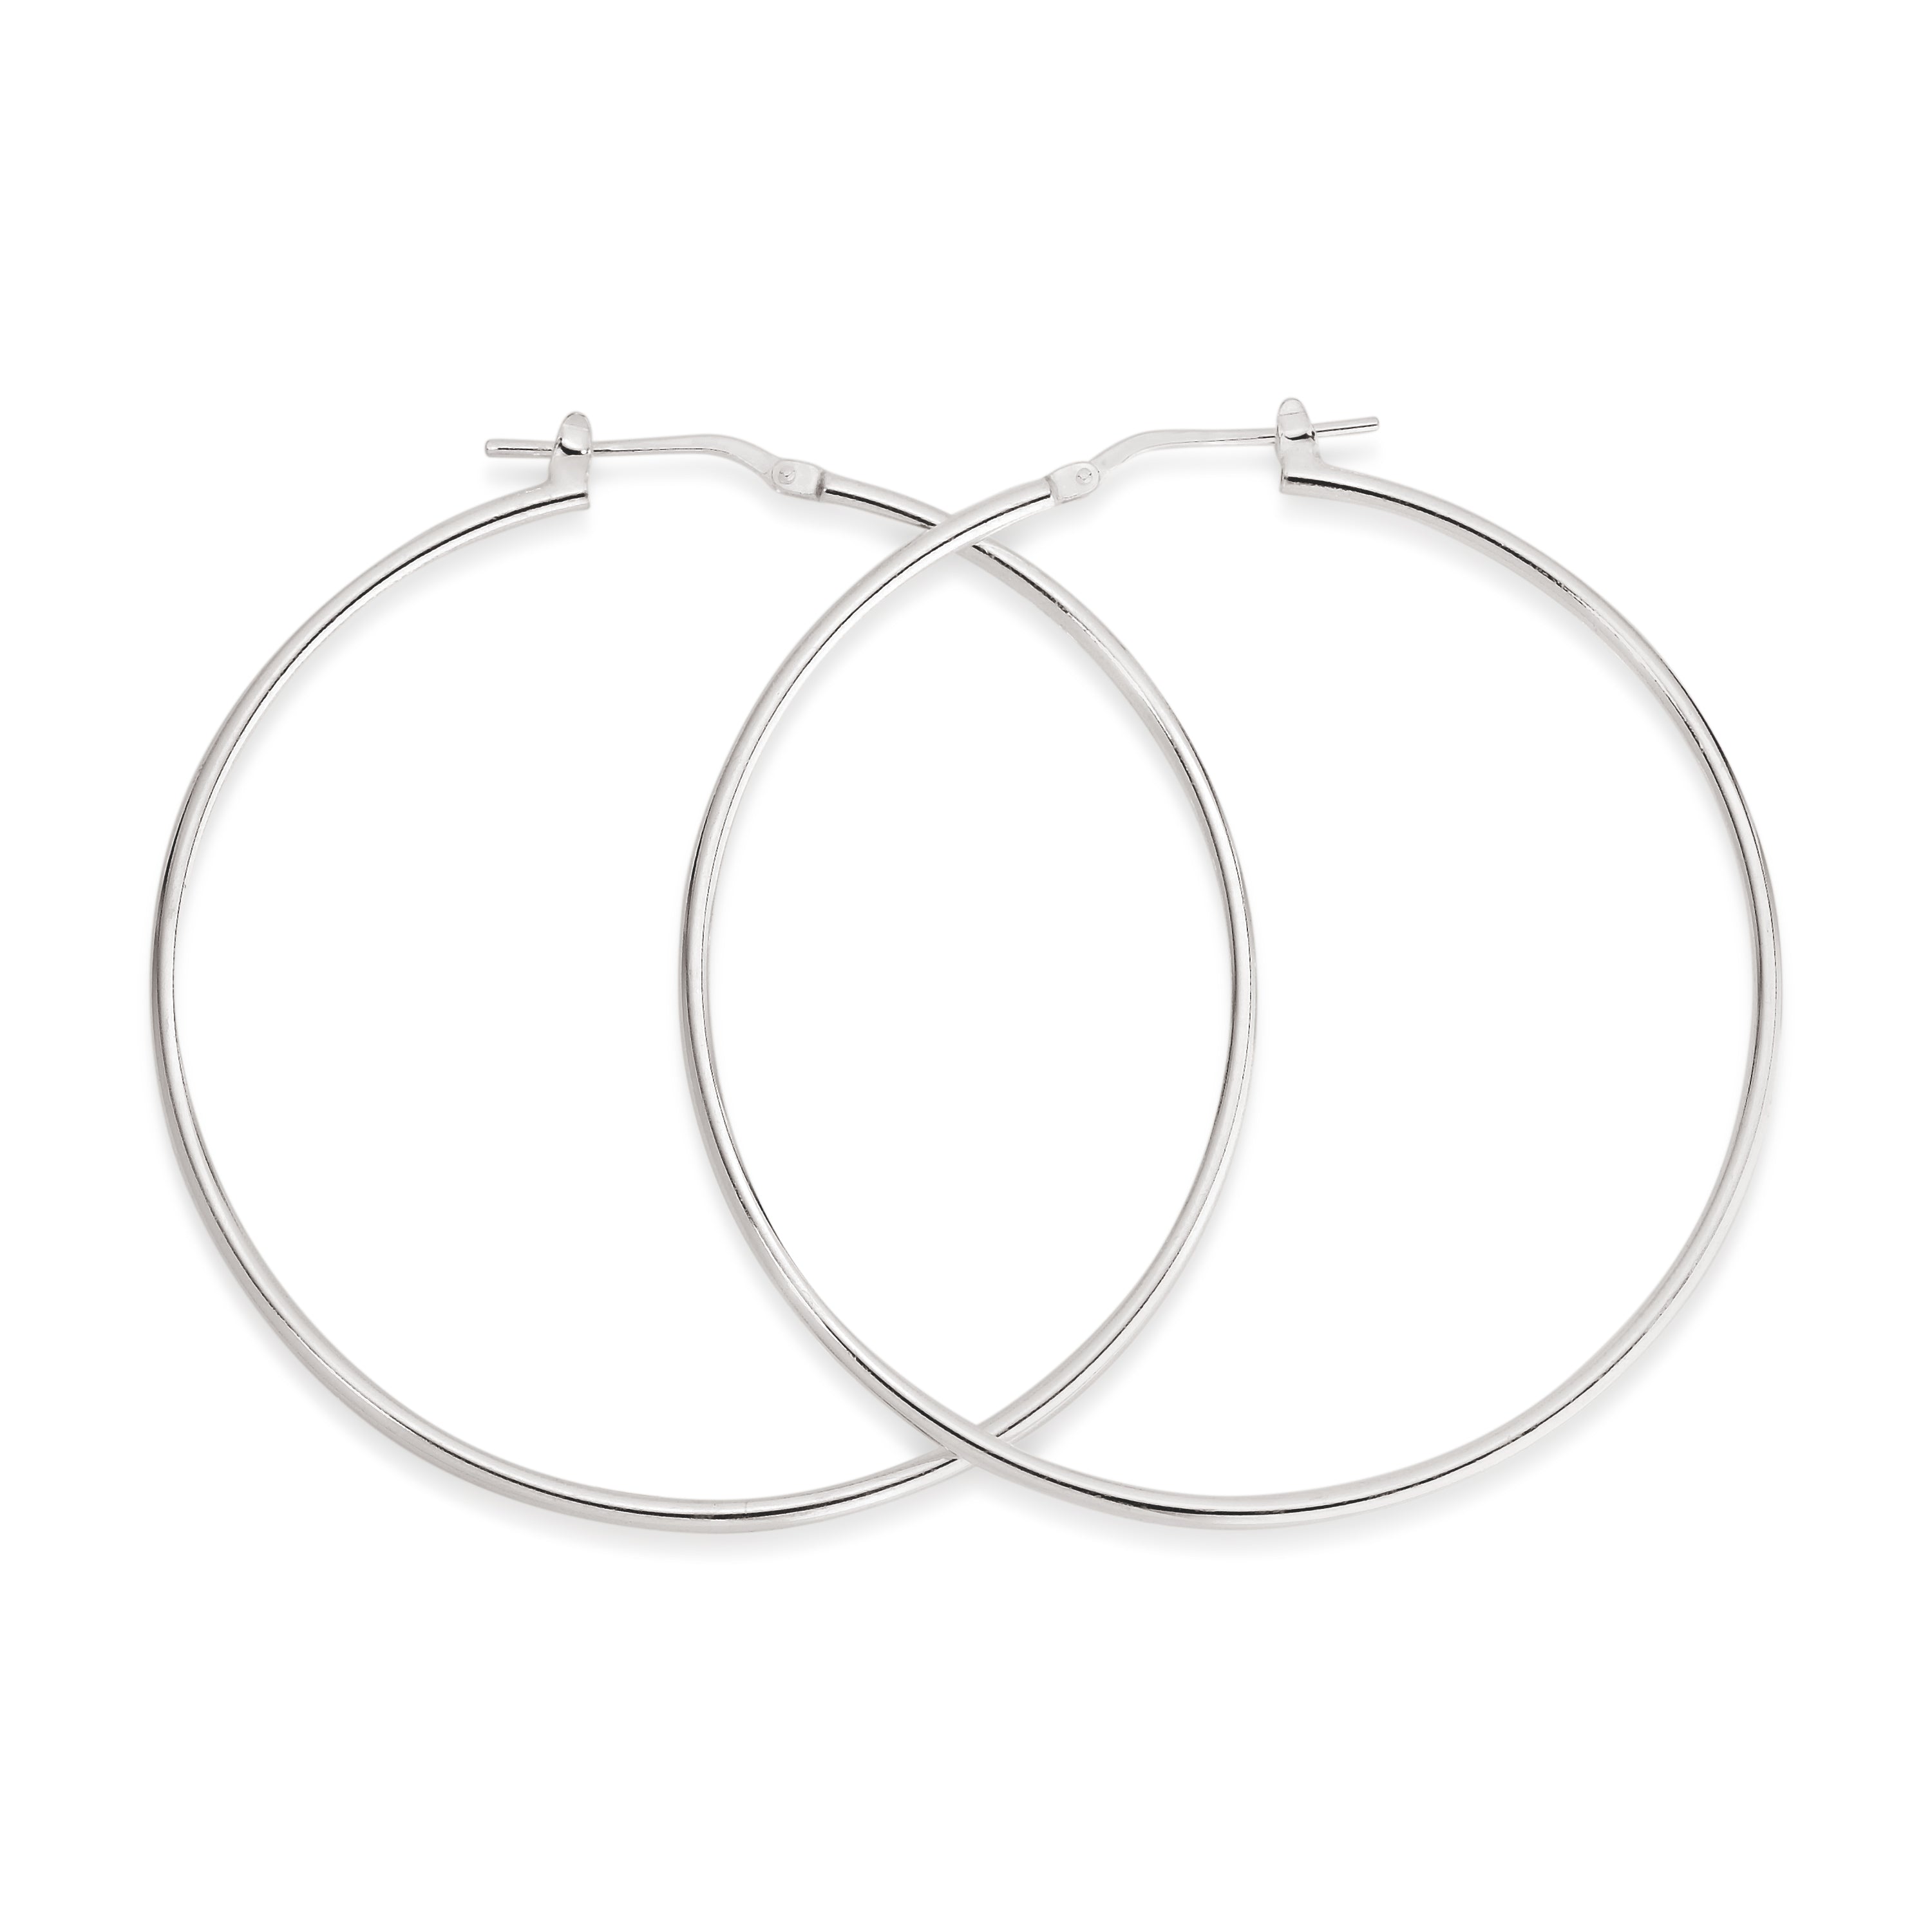 Silver polished hoops 50mm